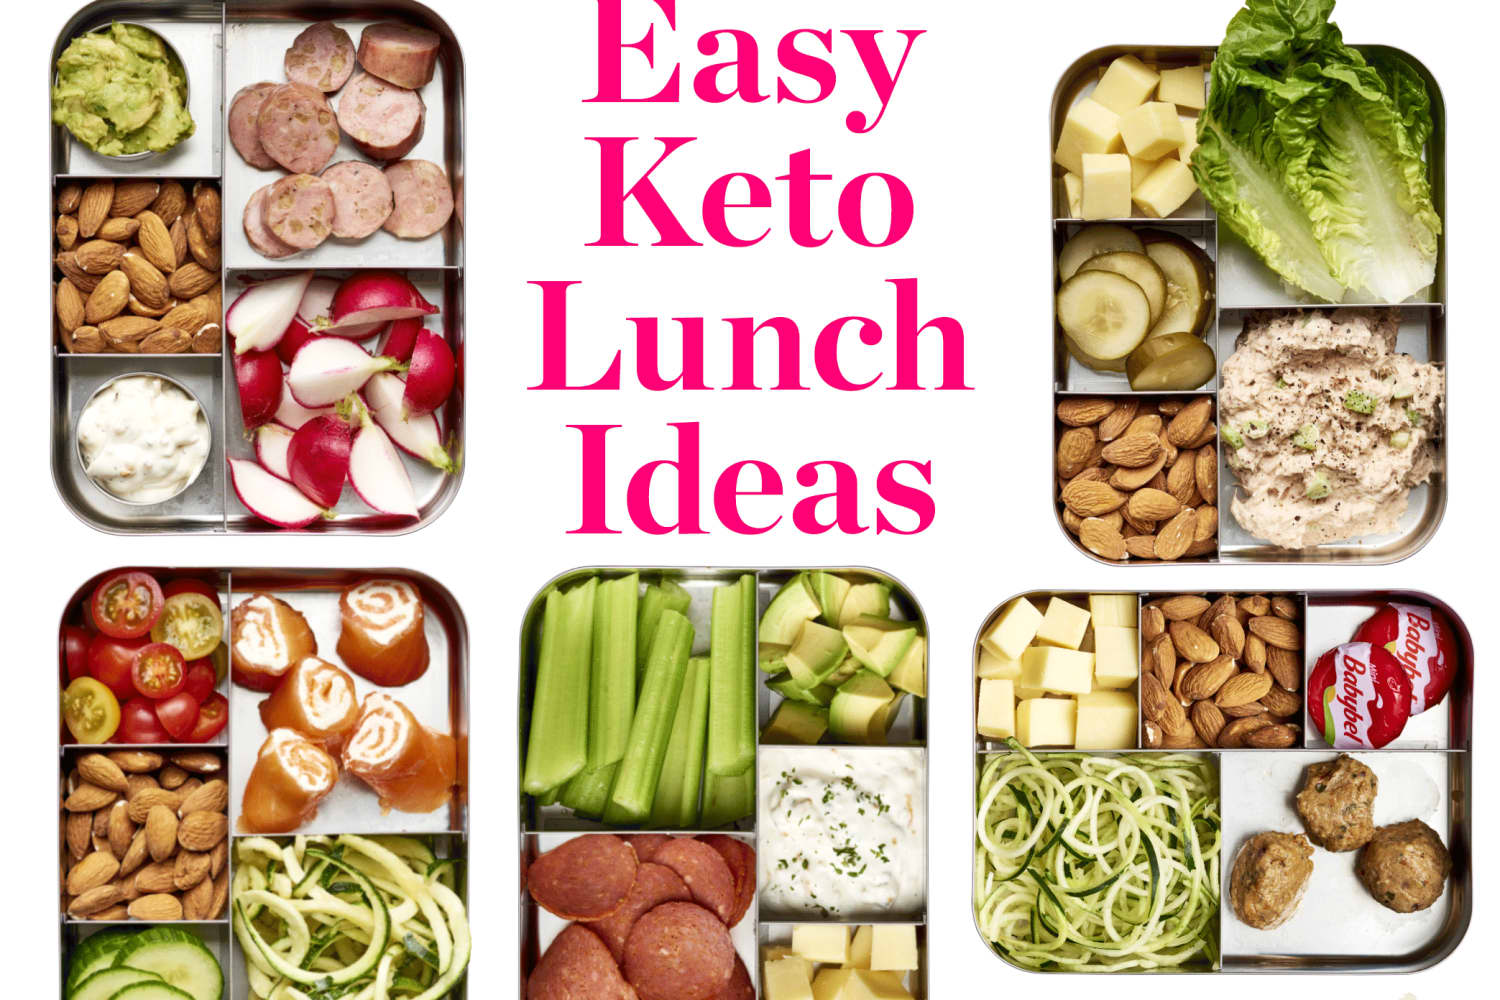 10 Easy Keto Lunch Ideas With Net Carb Counts The Kitchn 7592